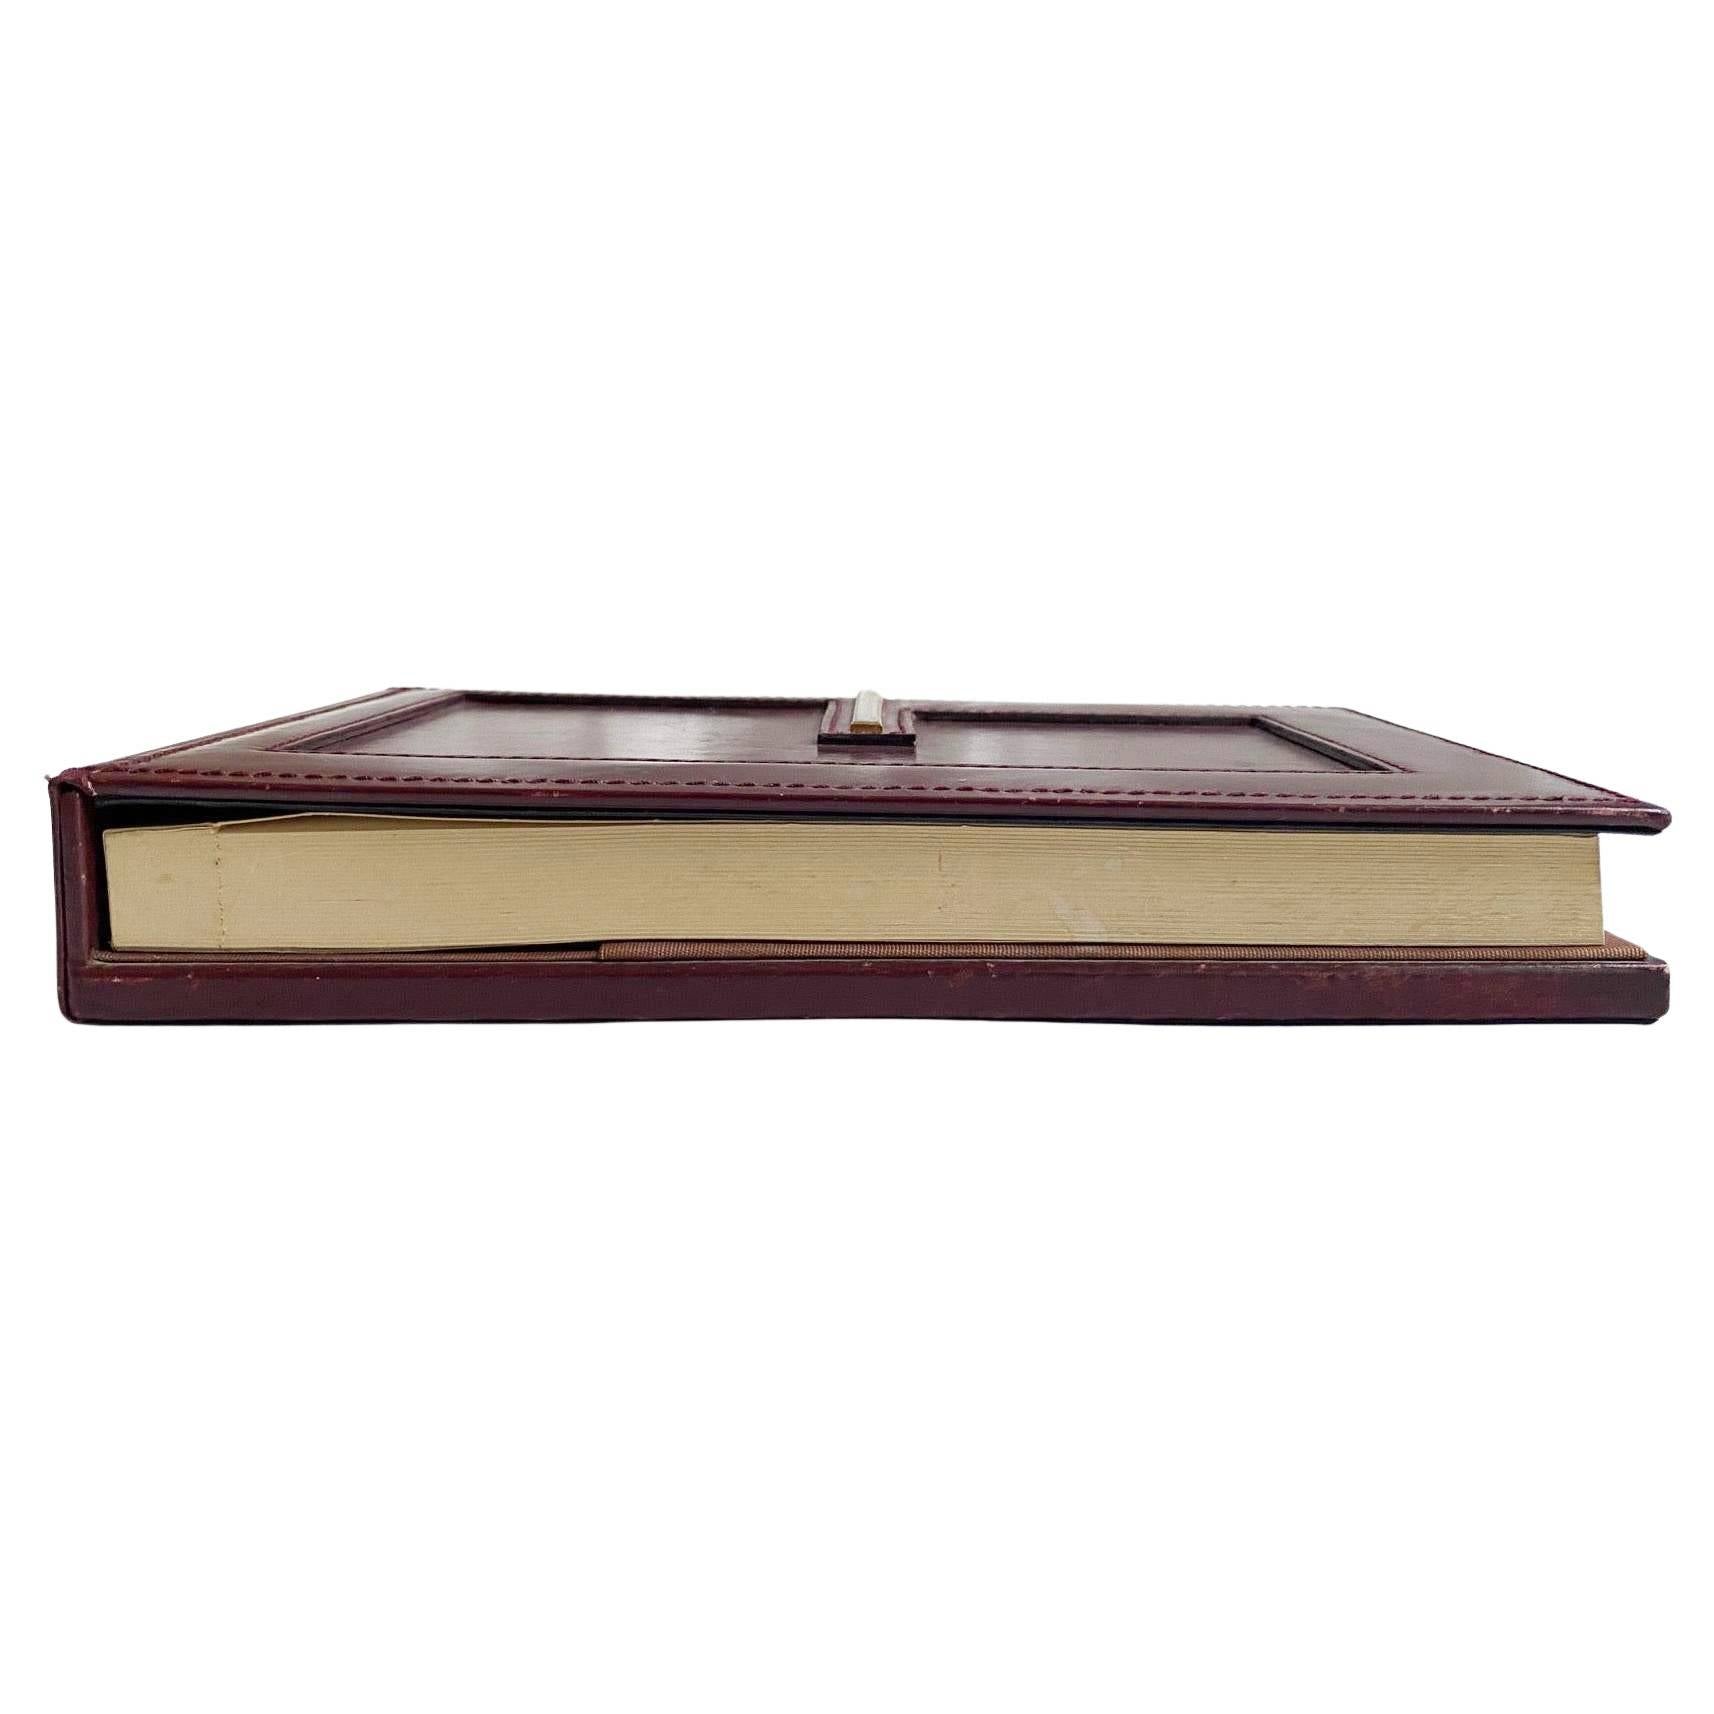 1980s Gucci Burgundy Leather Pad Book with Notes Block - style - CHNGR